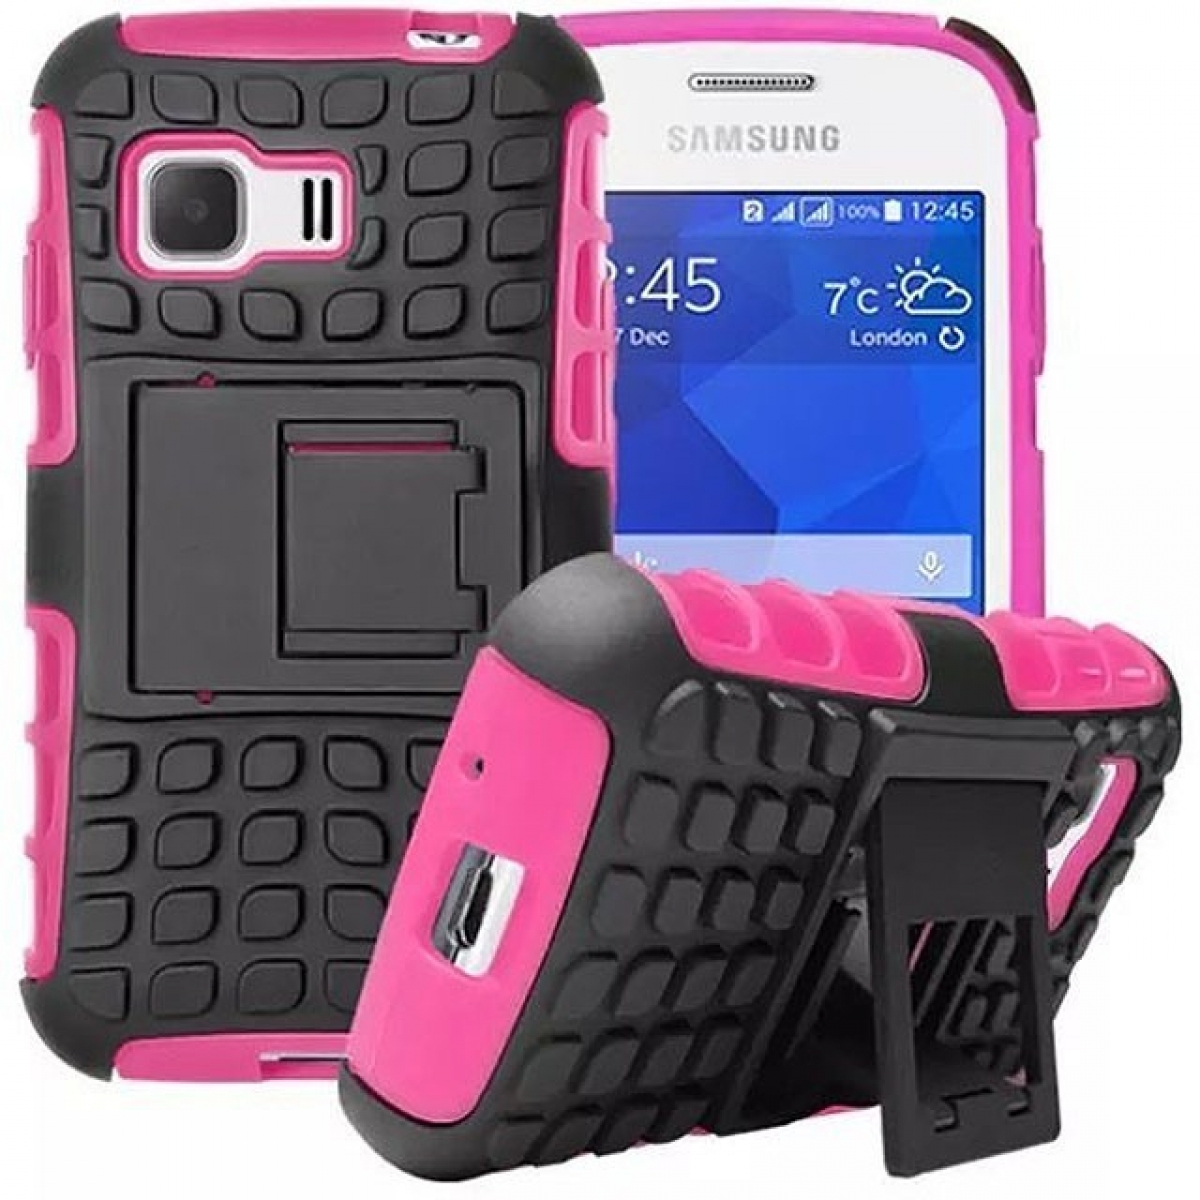 Backcover, Pink Young 2, Galaxy 2i1, CASEONLINE Samsung,